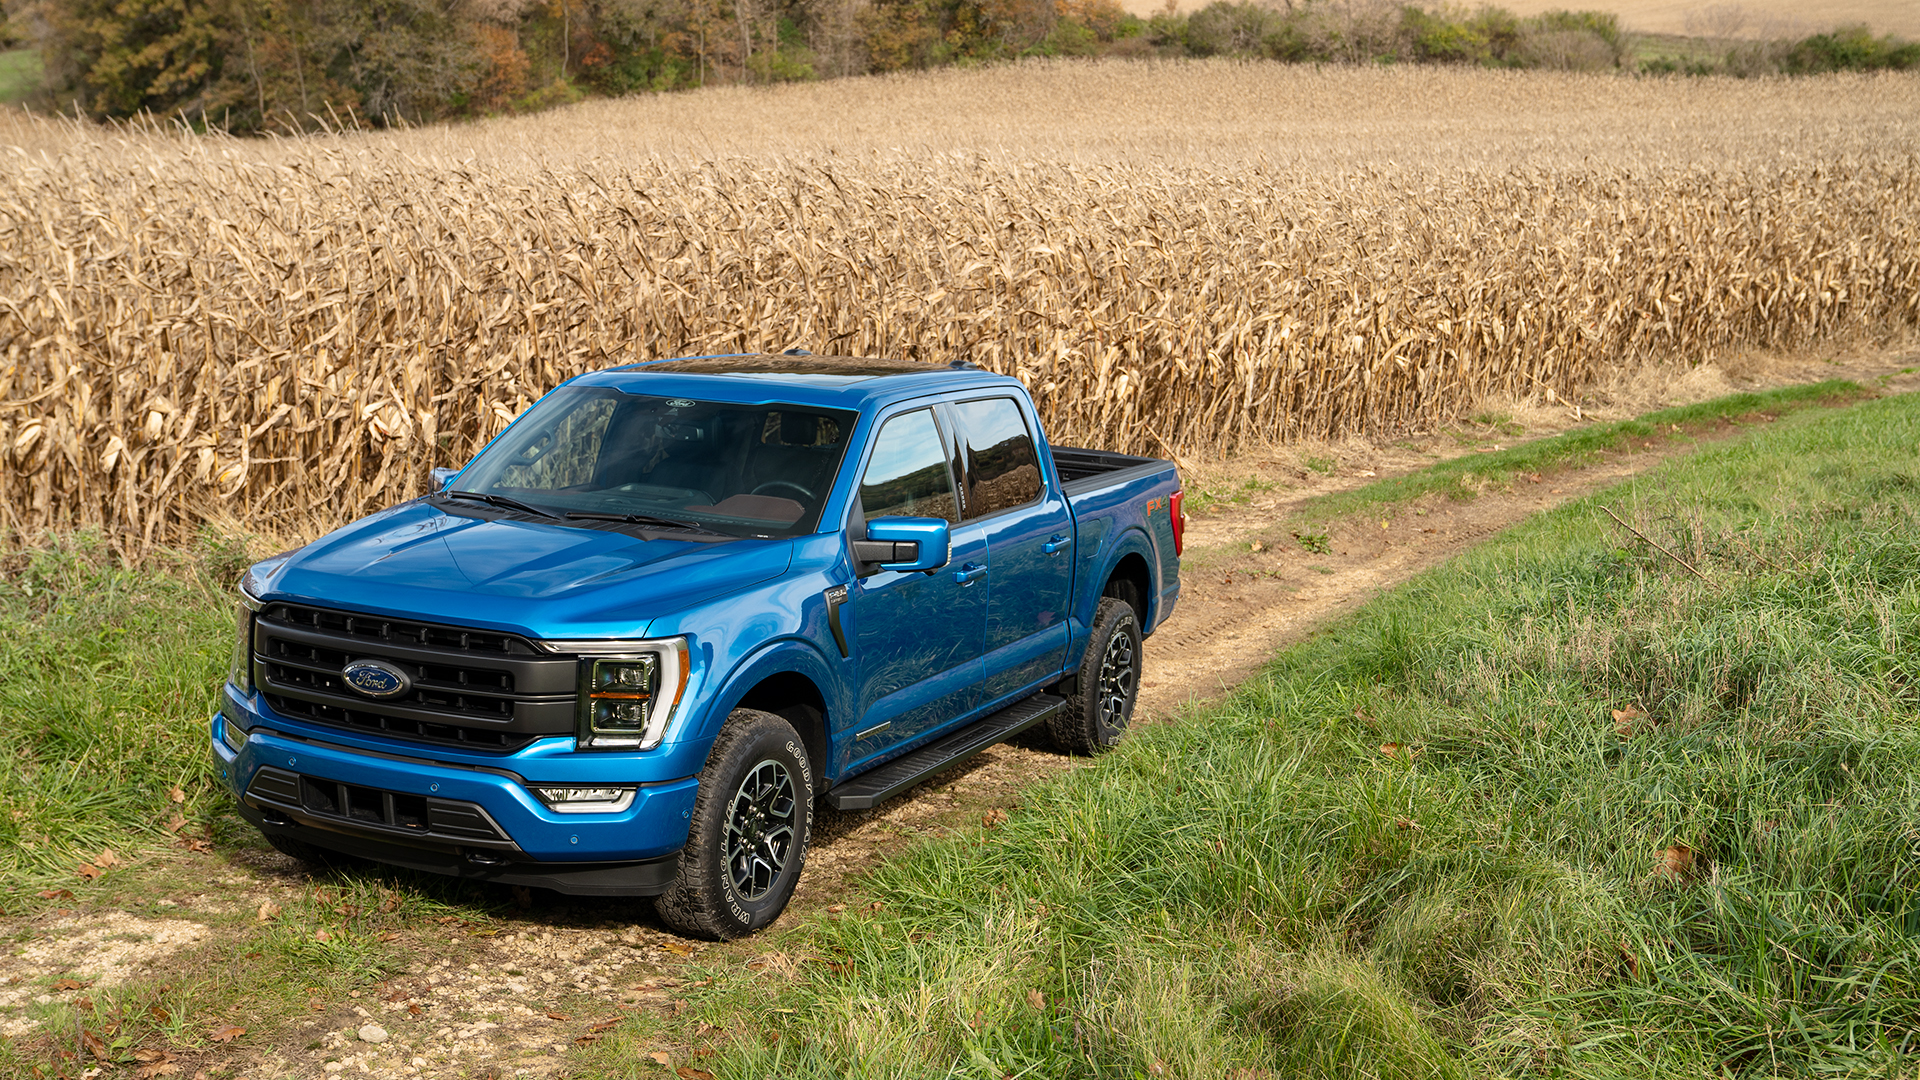 The F-150 is the total hunting truck package.